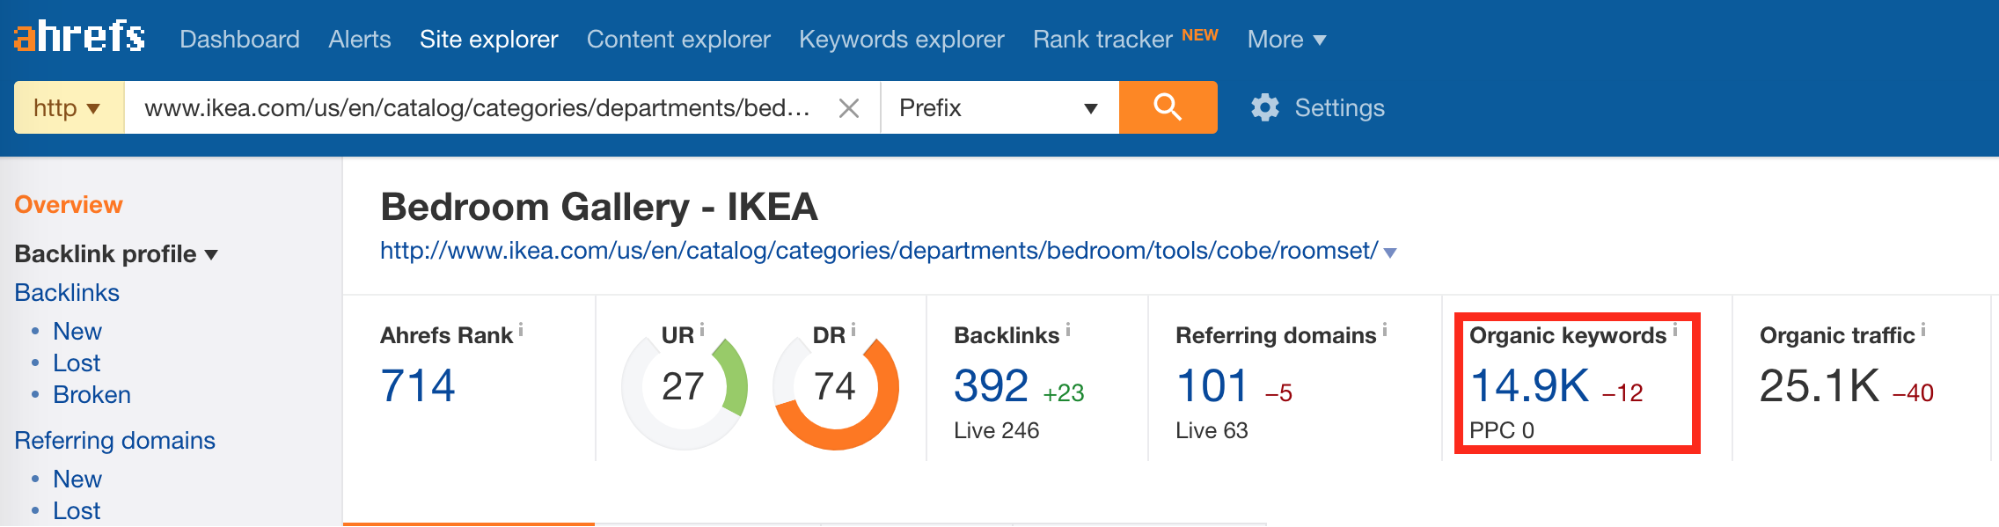 Screenshot showing ahrefs results for a page on ikea.com